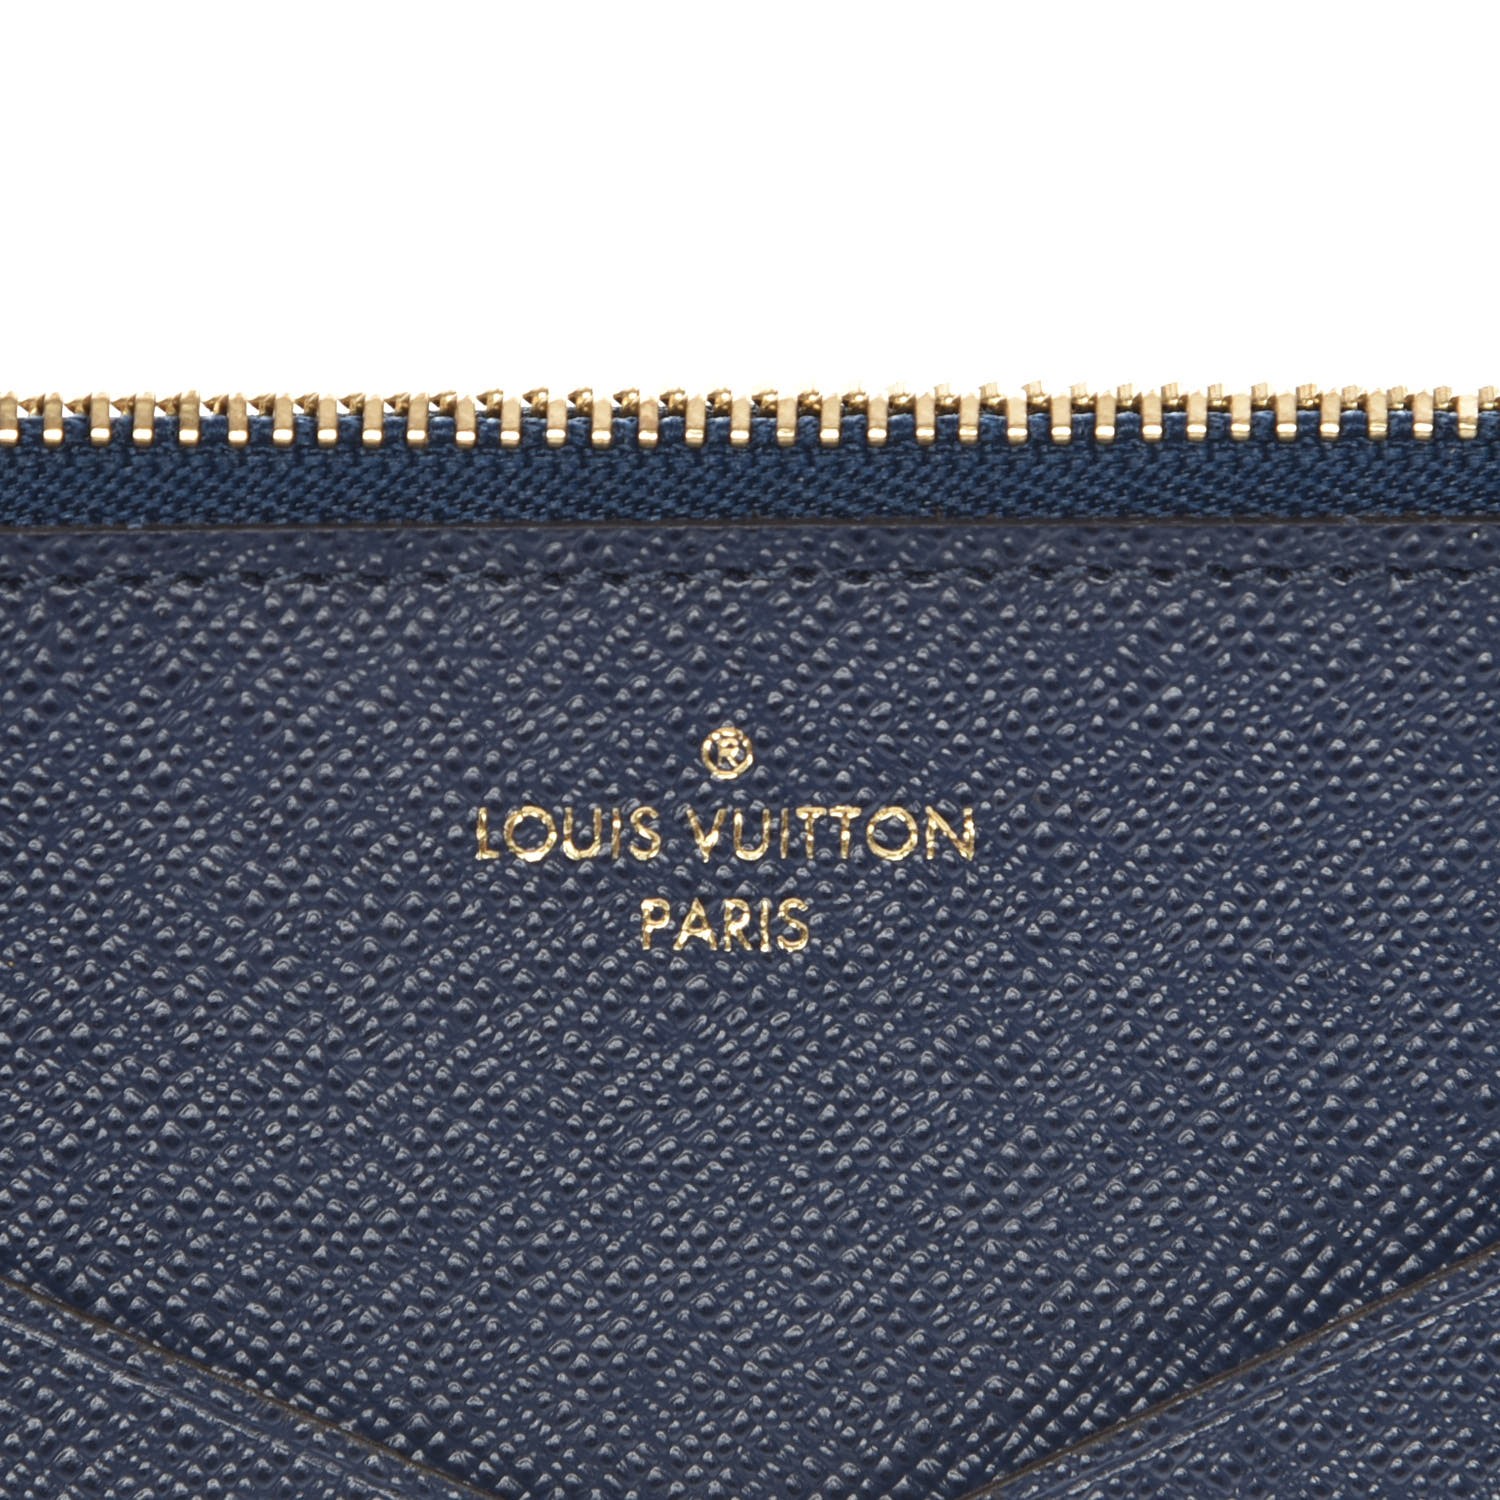 Lv Lockme Shopper Reviewed  Natural Resource Department